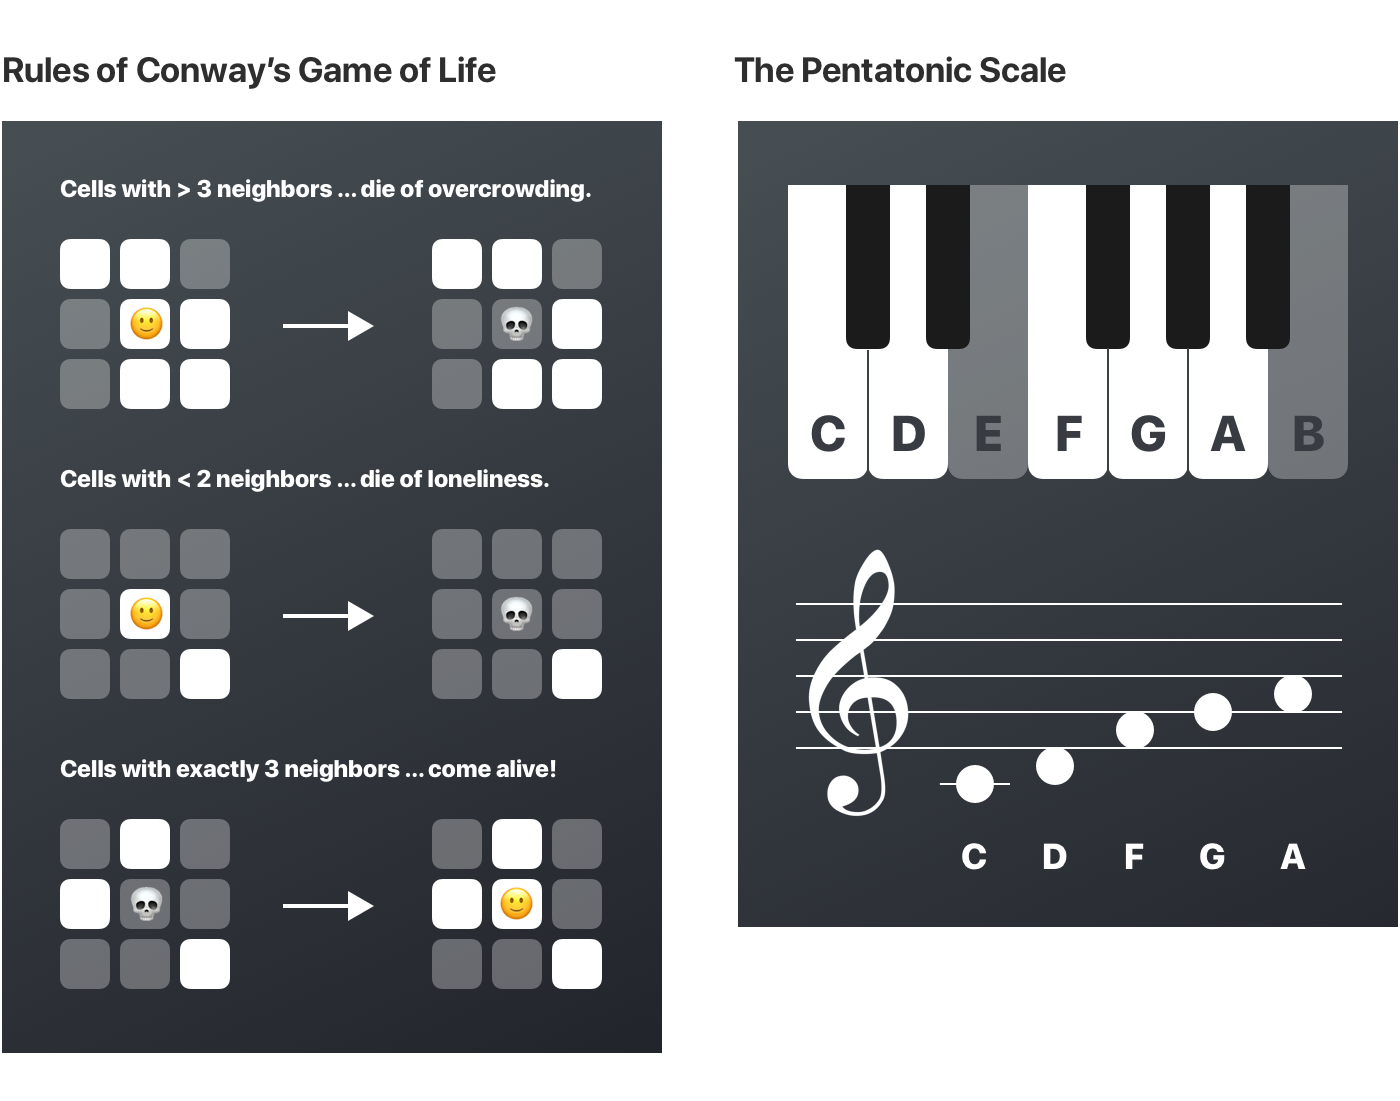 How it works: Images showing the rules of conway's game of life and the notes in a pentatonic scale.